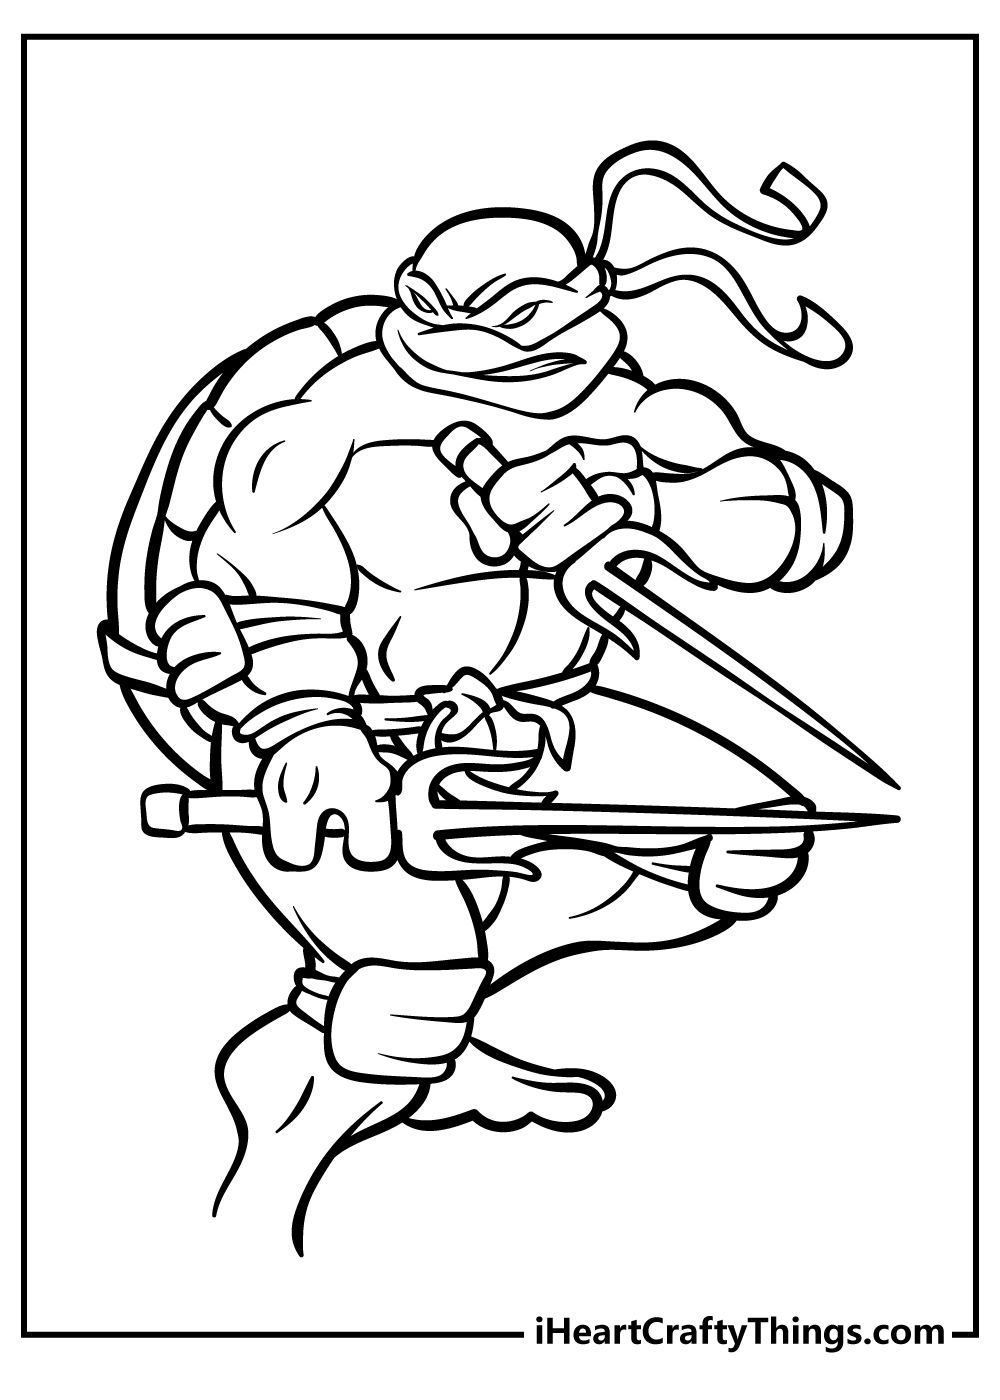 Ninja Turtles Coloring Book for adults free download